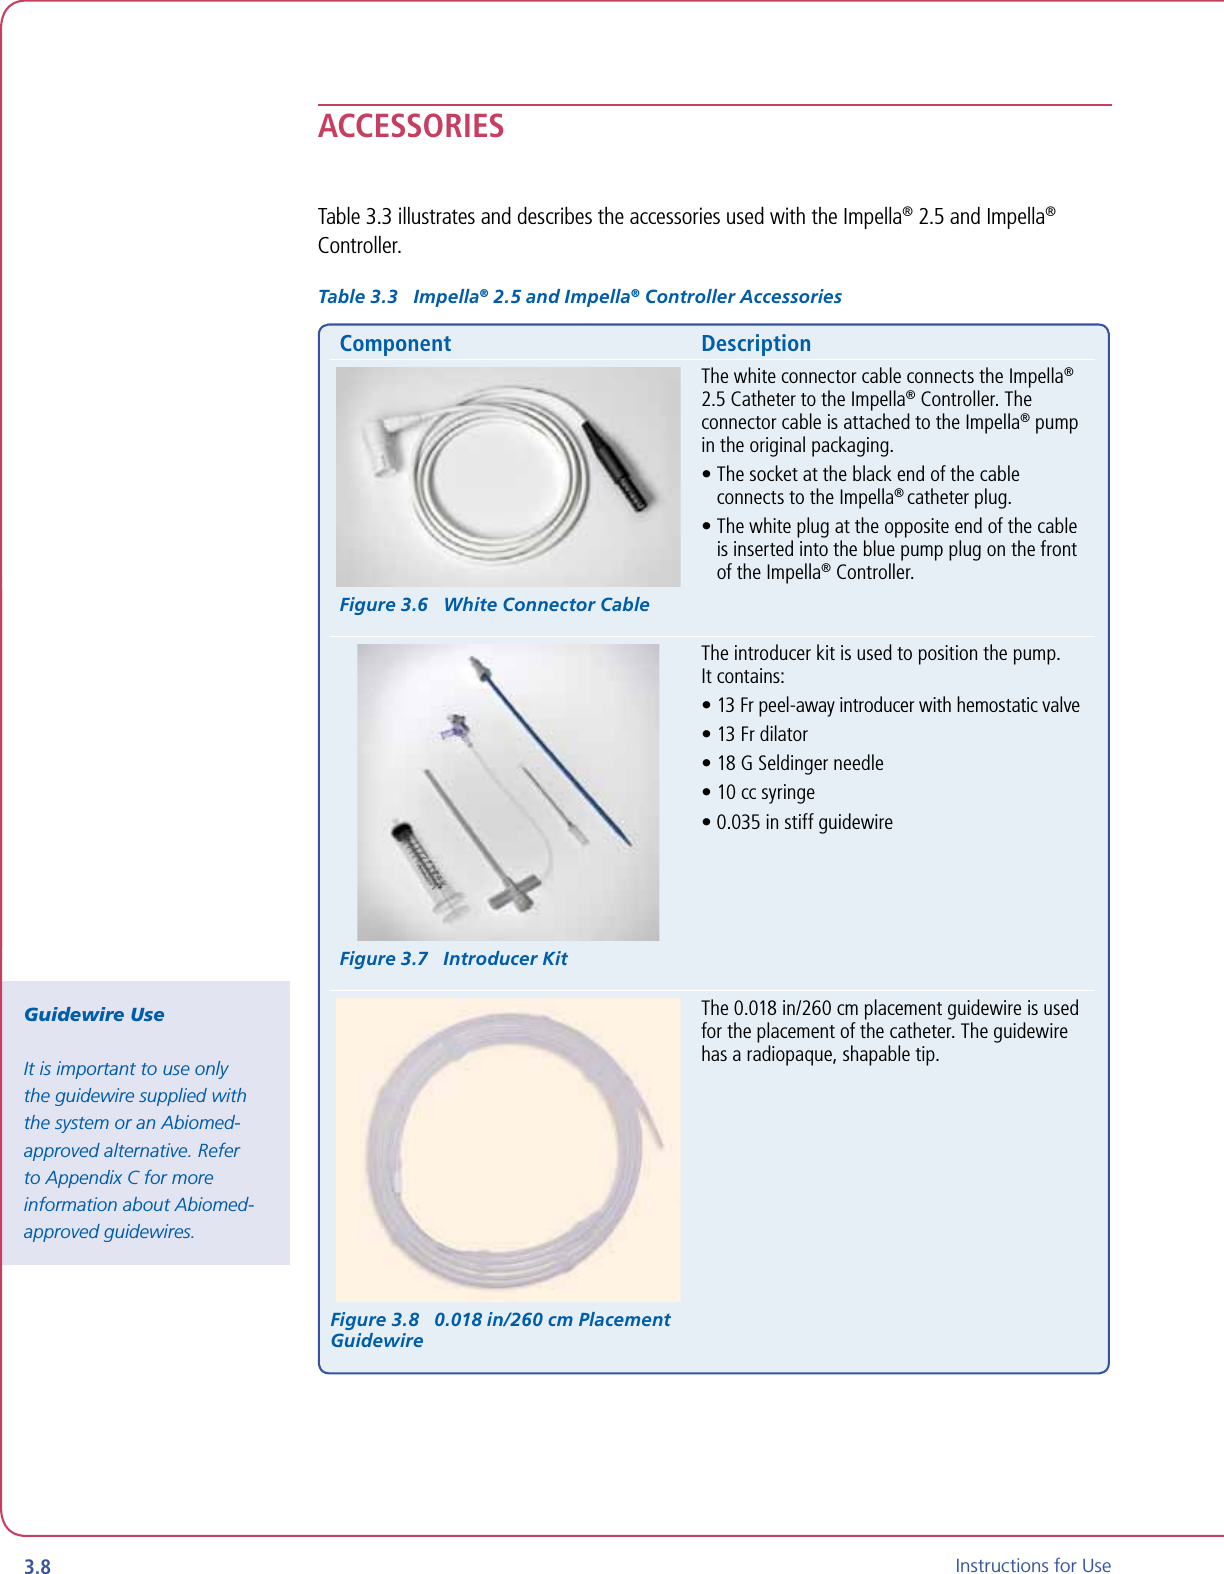 3.8 Instructions for UseACCESSORIESTable 3.3 illustrates and describes the accessories used with the Impella® 2.5 and Impella® Controller.Table 3.3   Impella® 2.5 and Impella® Controller AccessoriesComponent DescriptionFigure 3.6   White Connector CableThe white connector cable connects the Impella® 2.5 Catheter to the Impella® Controller. The connector cable is attached to the Impella® pump in the original packaging.•  The socket at the black end of the cable connects to the Impella® catheter plug.•  The white plug at the opposite end of the cable is inserted into the blue pump plug on the front of the Impella® Controller.Figure 3.7   Introducer KitThe introducer kit is used to position the pump. It contains:•  13 Fr peel-away introducer with hemostatic valve•  13 Fr dilator•  18 G Seldinger needle•  10 cc syringe•  0.035 in stiff guidewireFigure 3.8   0.018 in/260 cm Placement GuidewireThe 0.018 in/260 cm placement guidewire is used for the placement of the catheter. The guidewire has a radiopaque, shapable tip.Guidewire UseIt is important to use only the guidewire supplied with the system or an Abiomed-approved alternative. Refer to Appendix C for more information about Abiomed-approved guidewires.